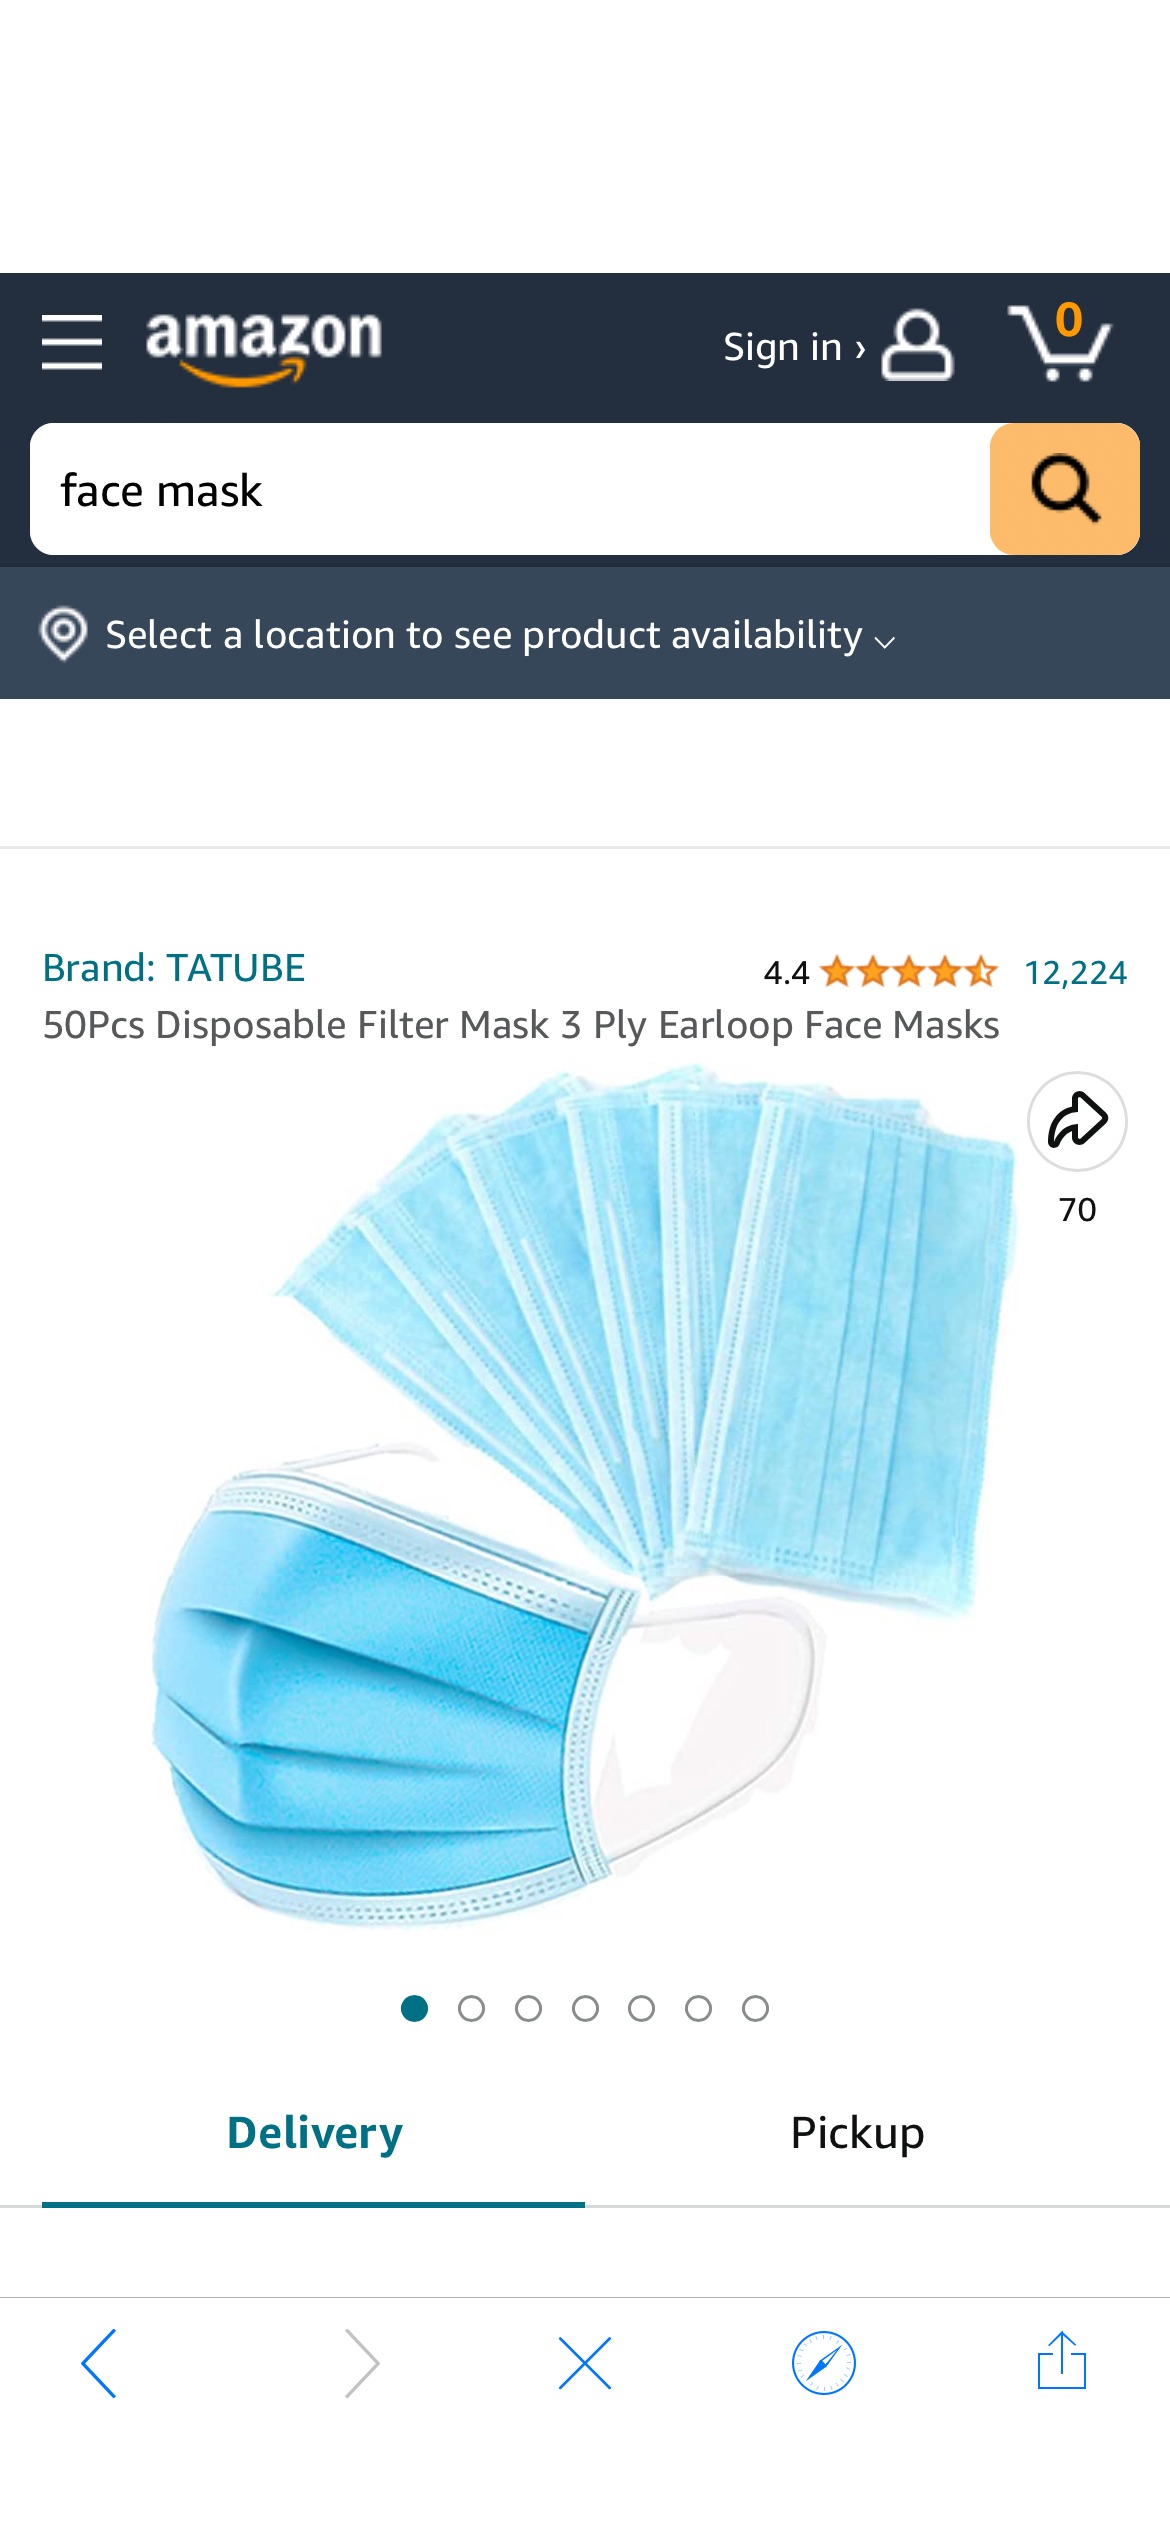 Amazon.com: 50Pcs Disposable Filter Mask 3 Ply Earloop Face Masks : Industrial & Scientific